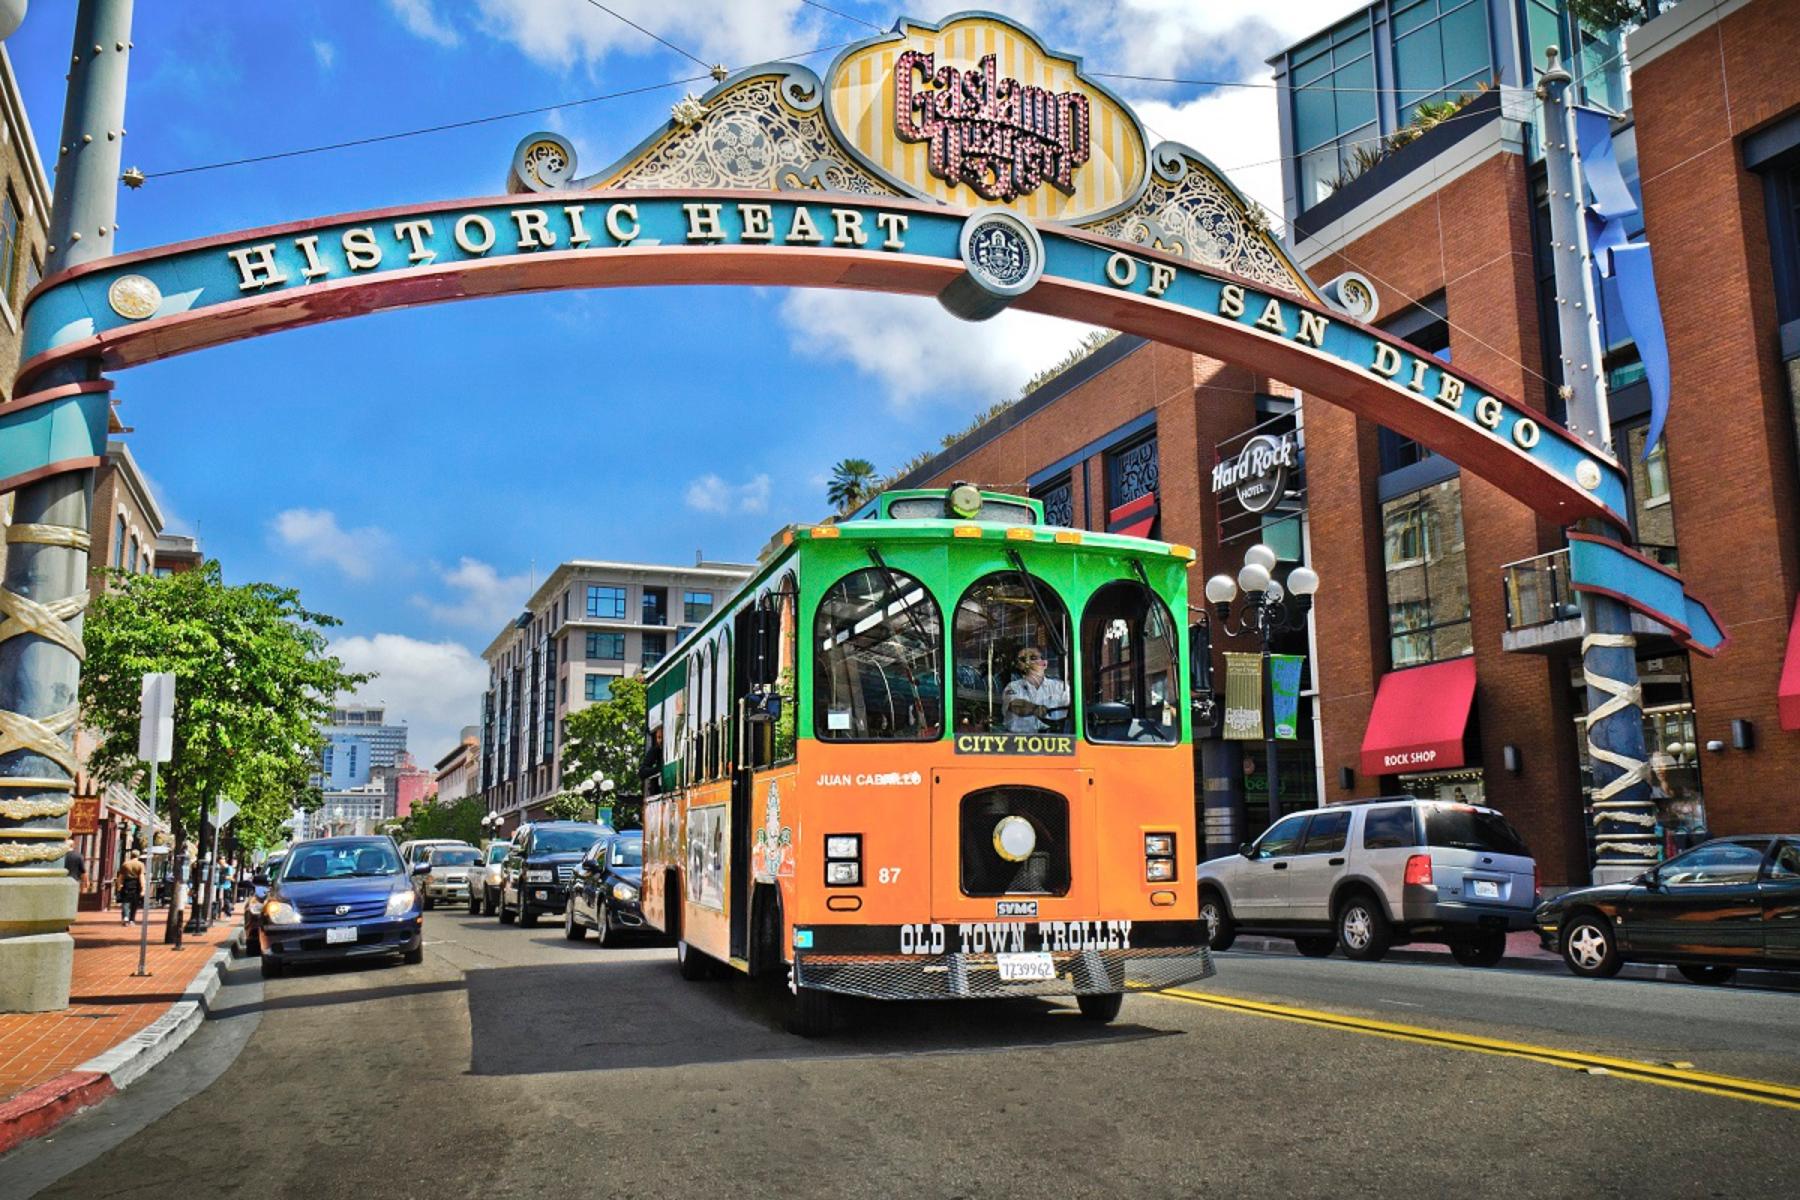 Visit San Diego by Trolley Bus – Hop-on, hop-off tour